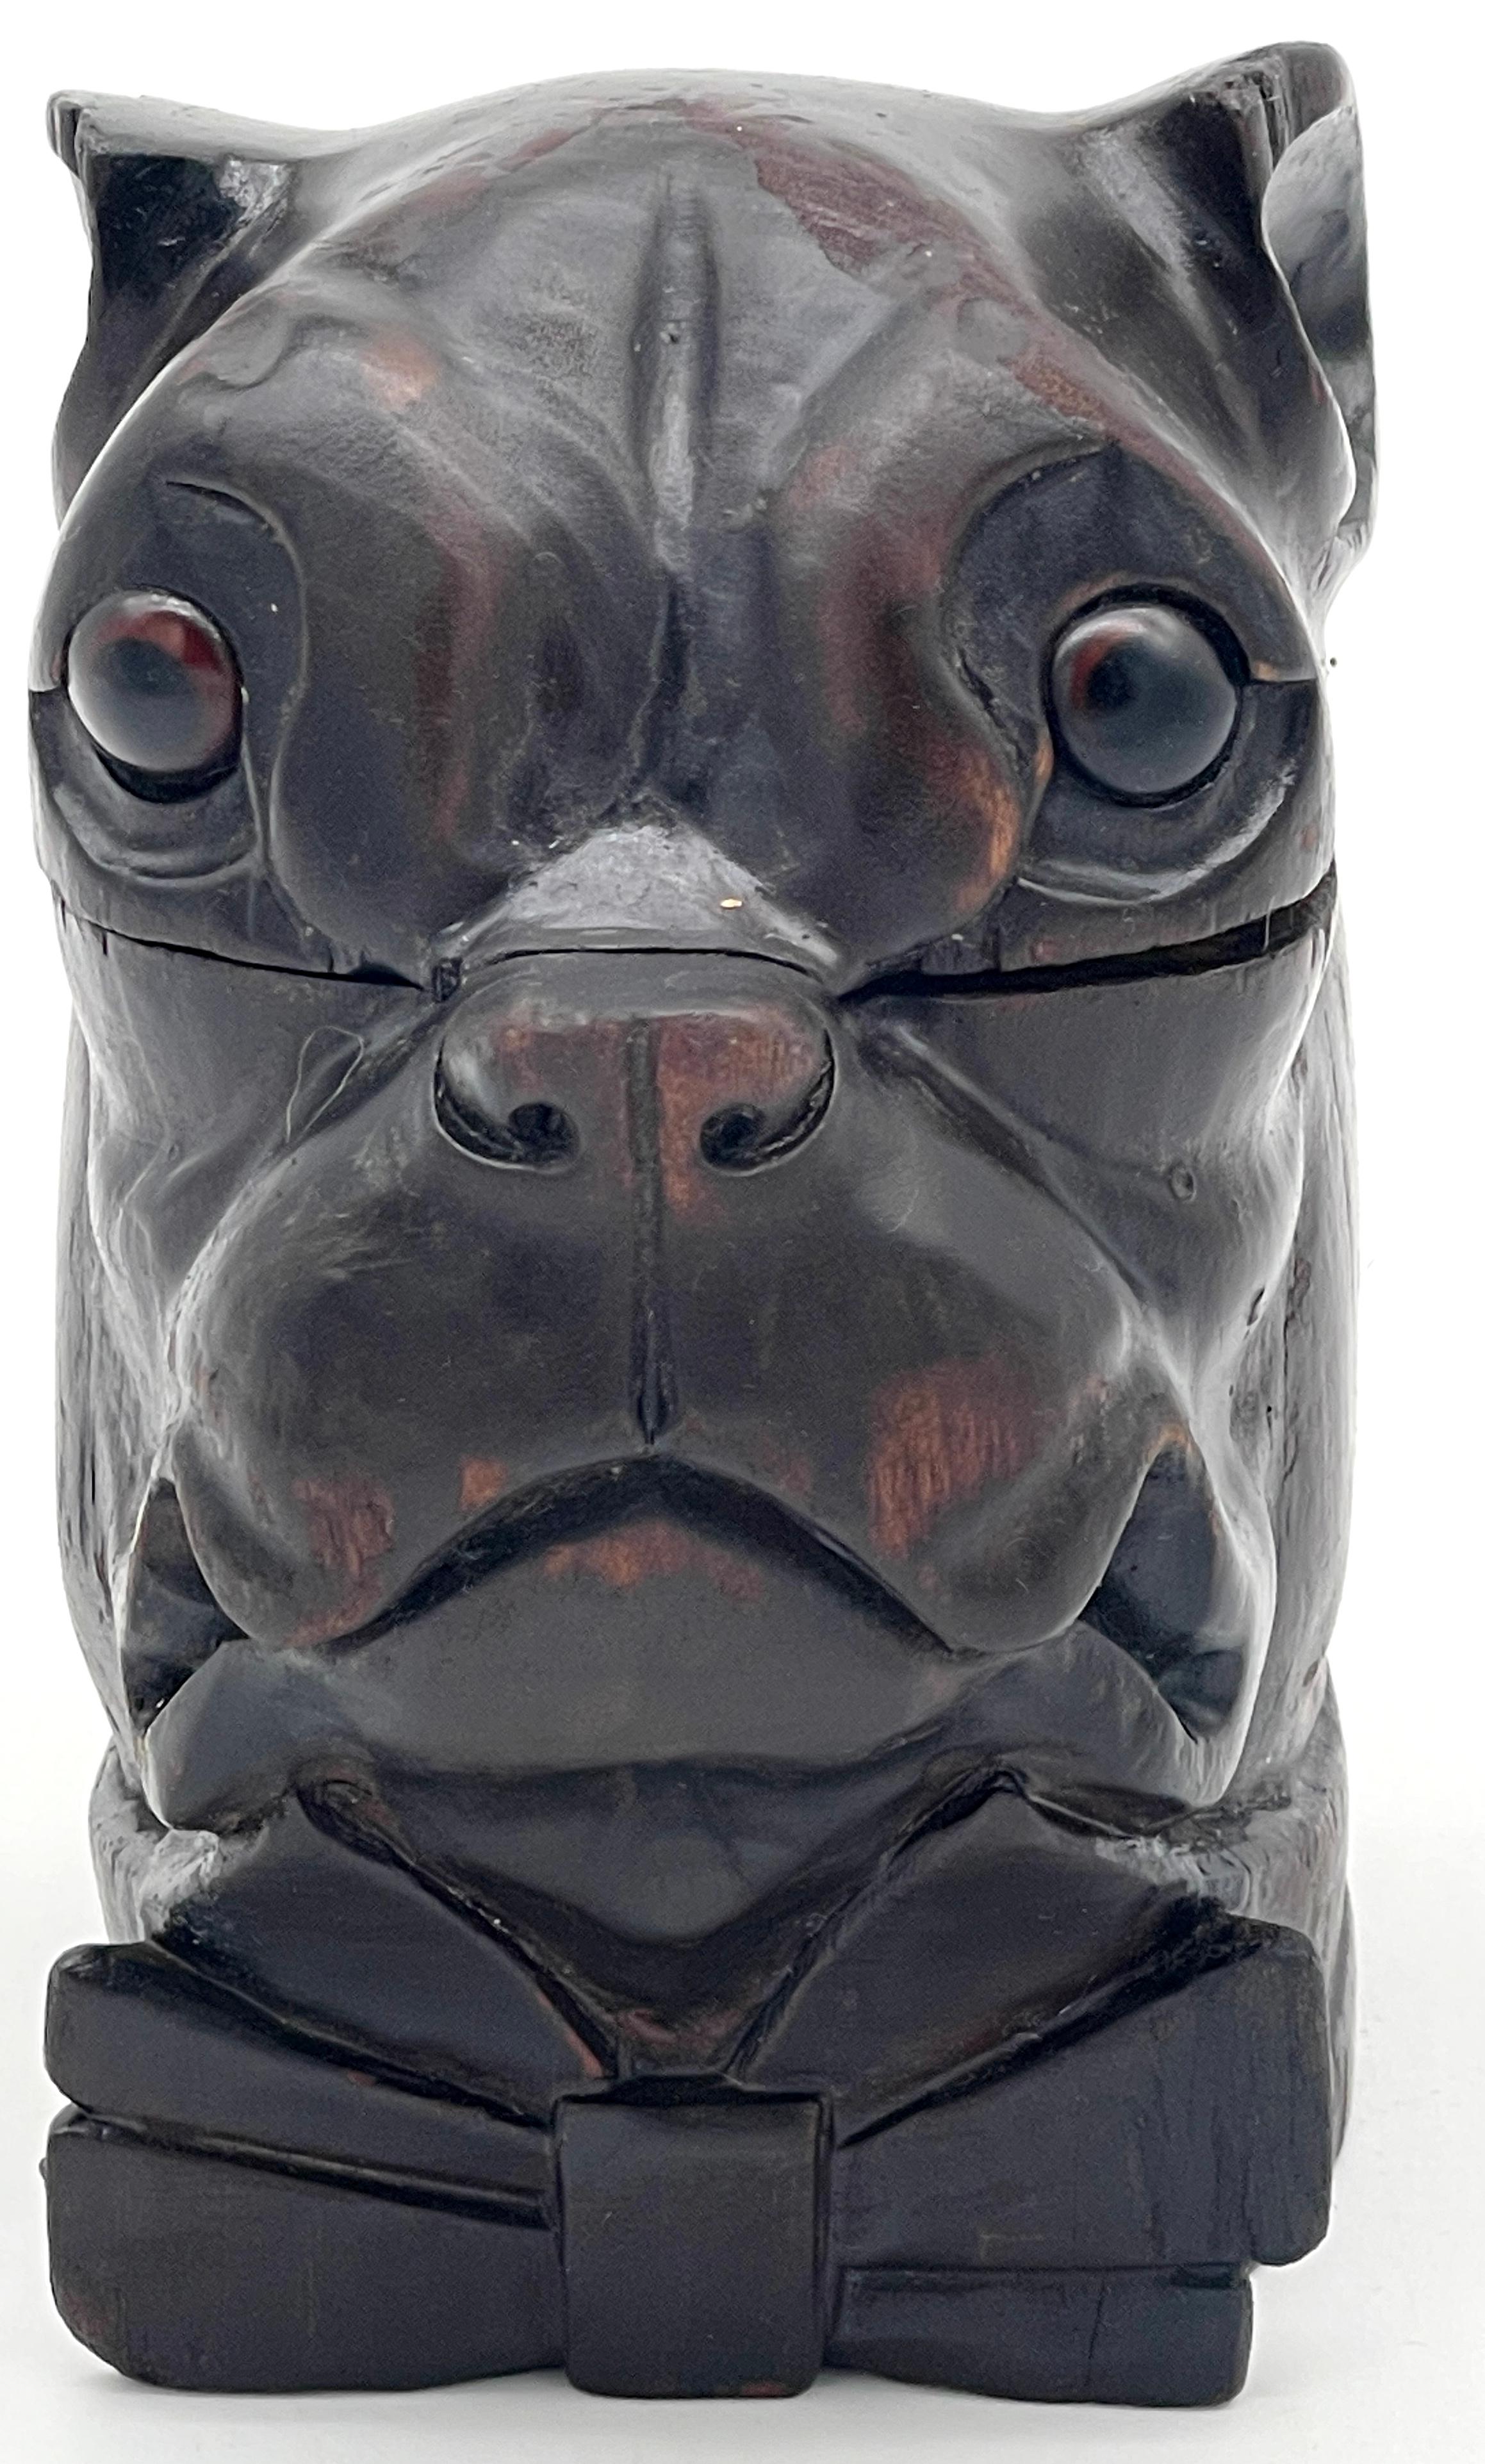 19th Century Victorian Blackened Lignum Vitae Bull/Pug Dog with Bow Tie Inkwell
England, circa 1880s

Presenting a remarkable 19th-century Blackened Victorian Lignum Vitae Bull/Pug Dog Inkwell, originating from England and dating back to the 1880s.